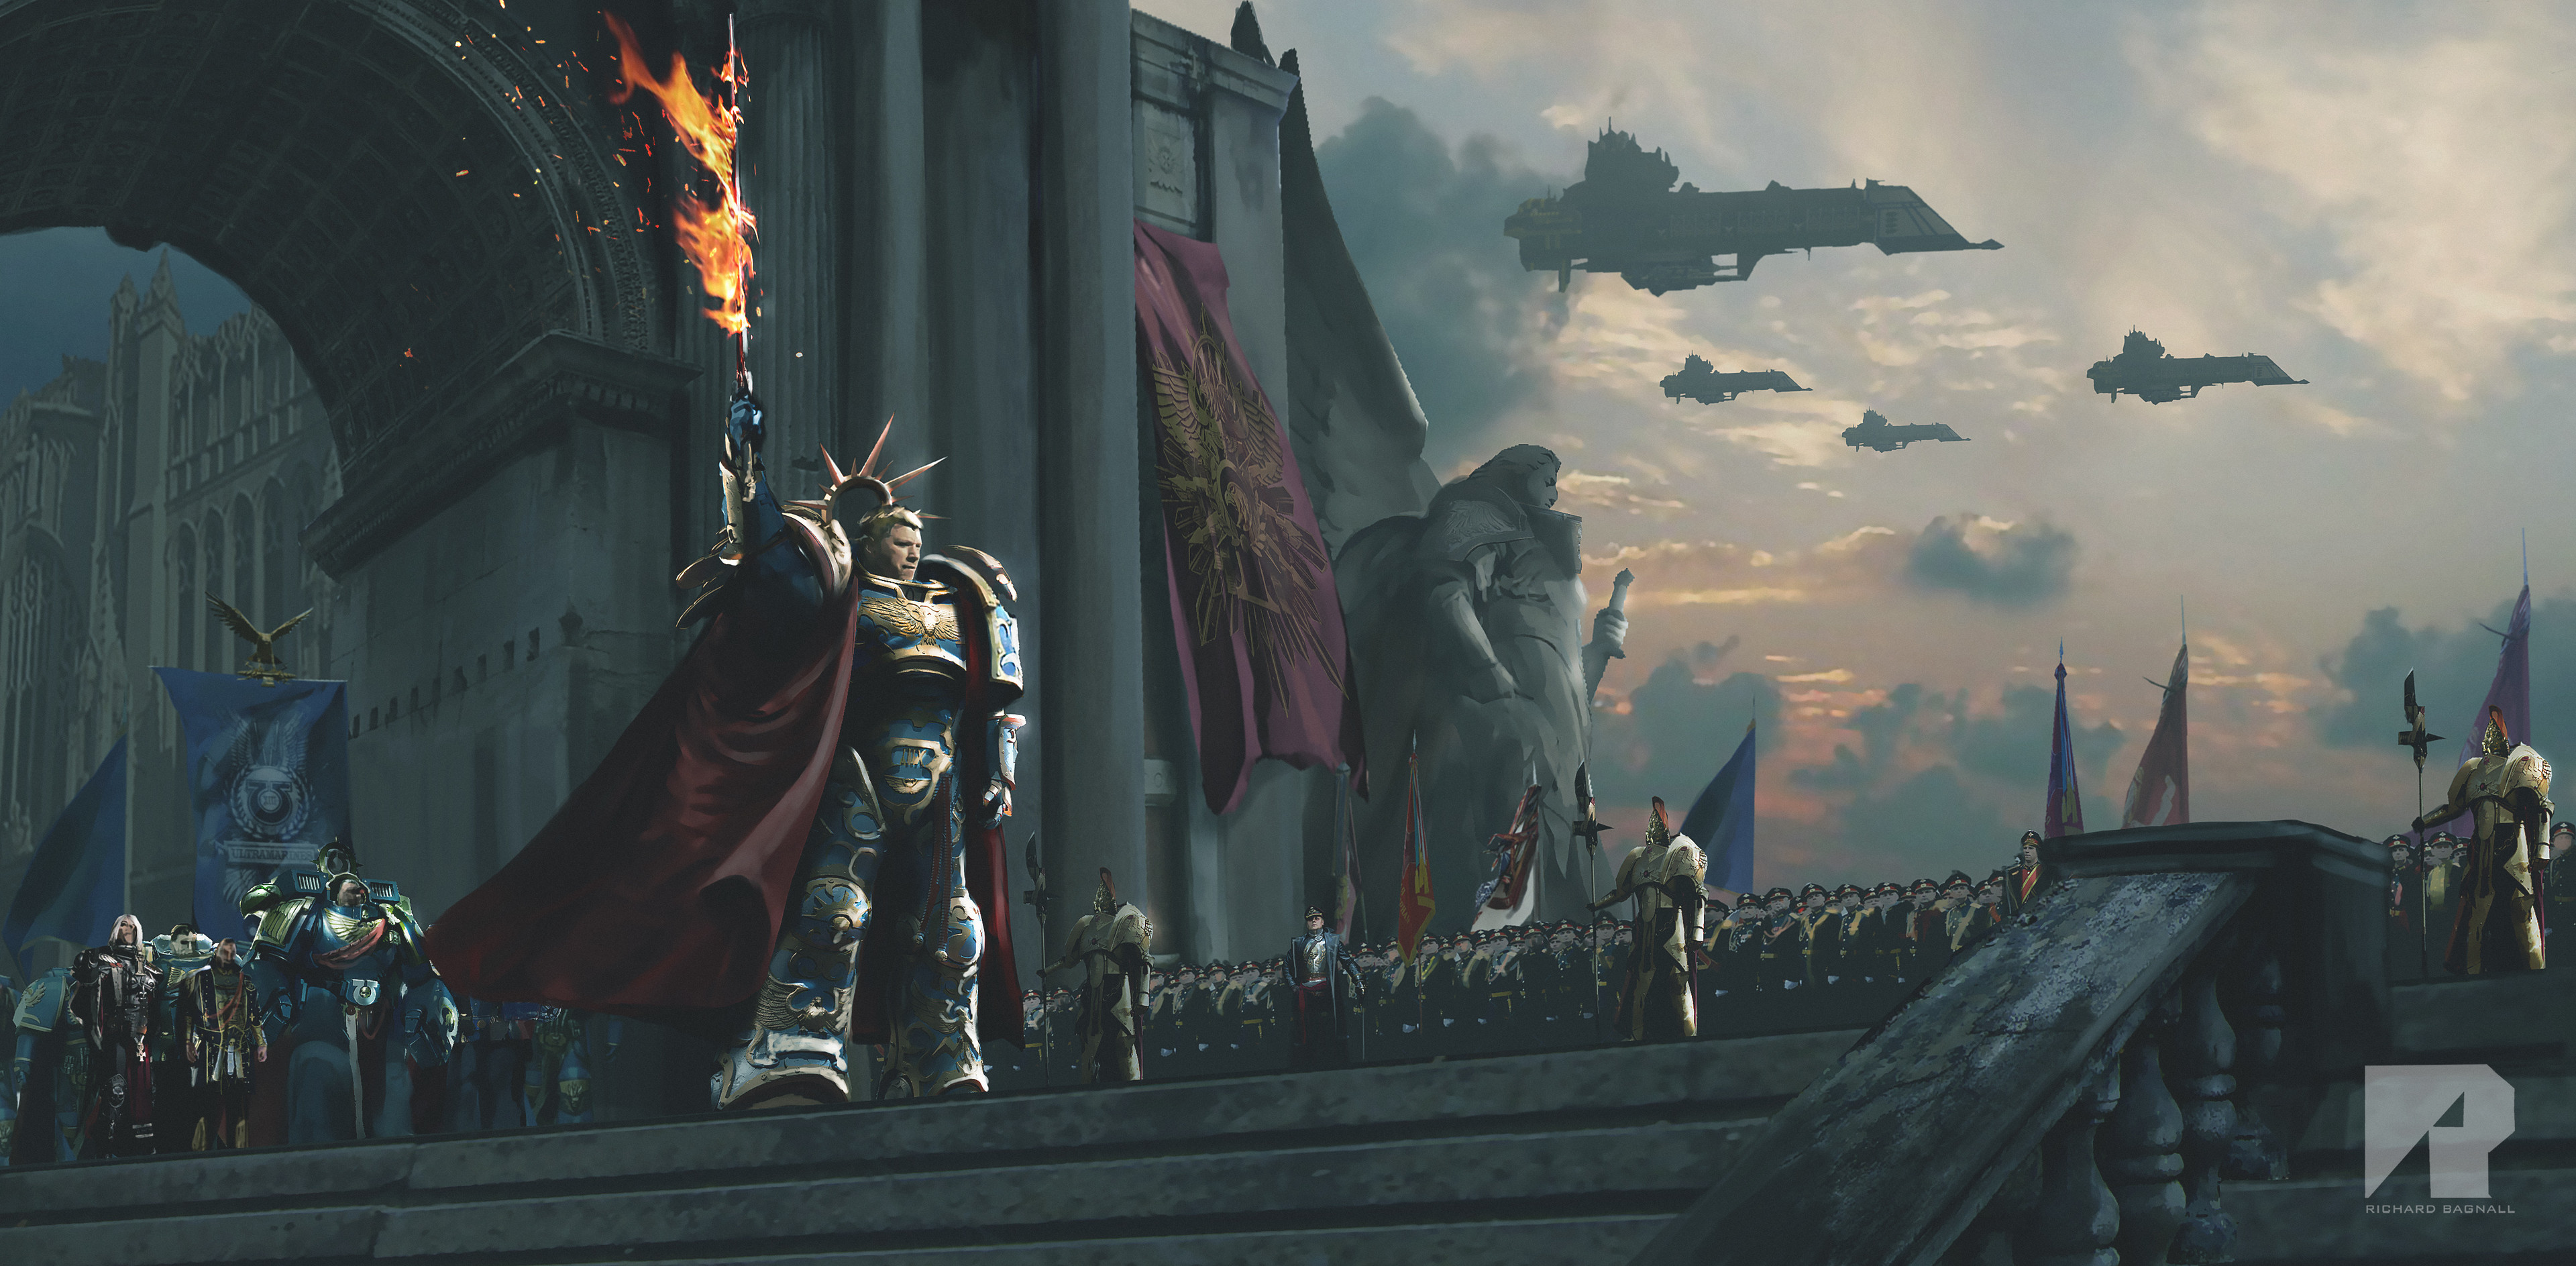 General 3840x1887 Warhammer Warhammer 30,000 Warhammer 40,000 science fiction high tech magic primarchs primarch blue gold red dark black power armor spaceship statue sky clouds fire torches army Imperium of Man Ultramarines city wall cape sword Ultramar sister of battle Terminator Armor video games video game art video game characters